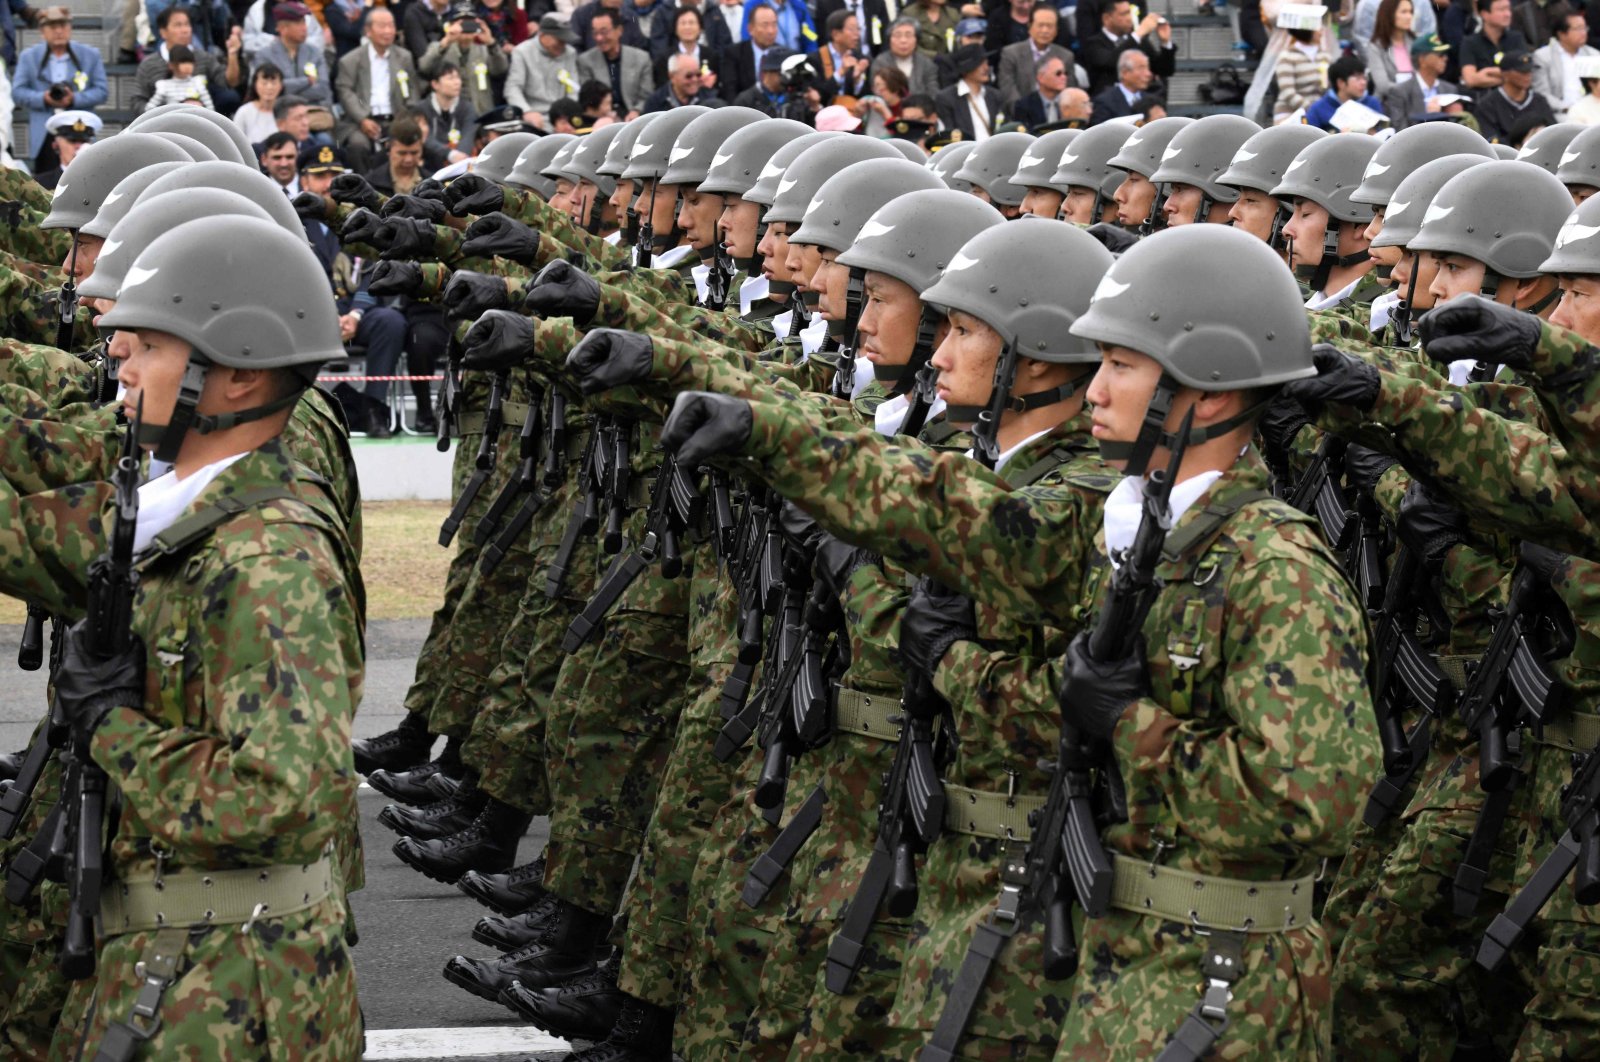 Japan Ground Self-Defense Forces taking part in a military review in Asaka, Saitama prefecture, Japan, Oct. 14, 2018. (AFP Photo)